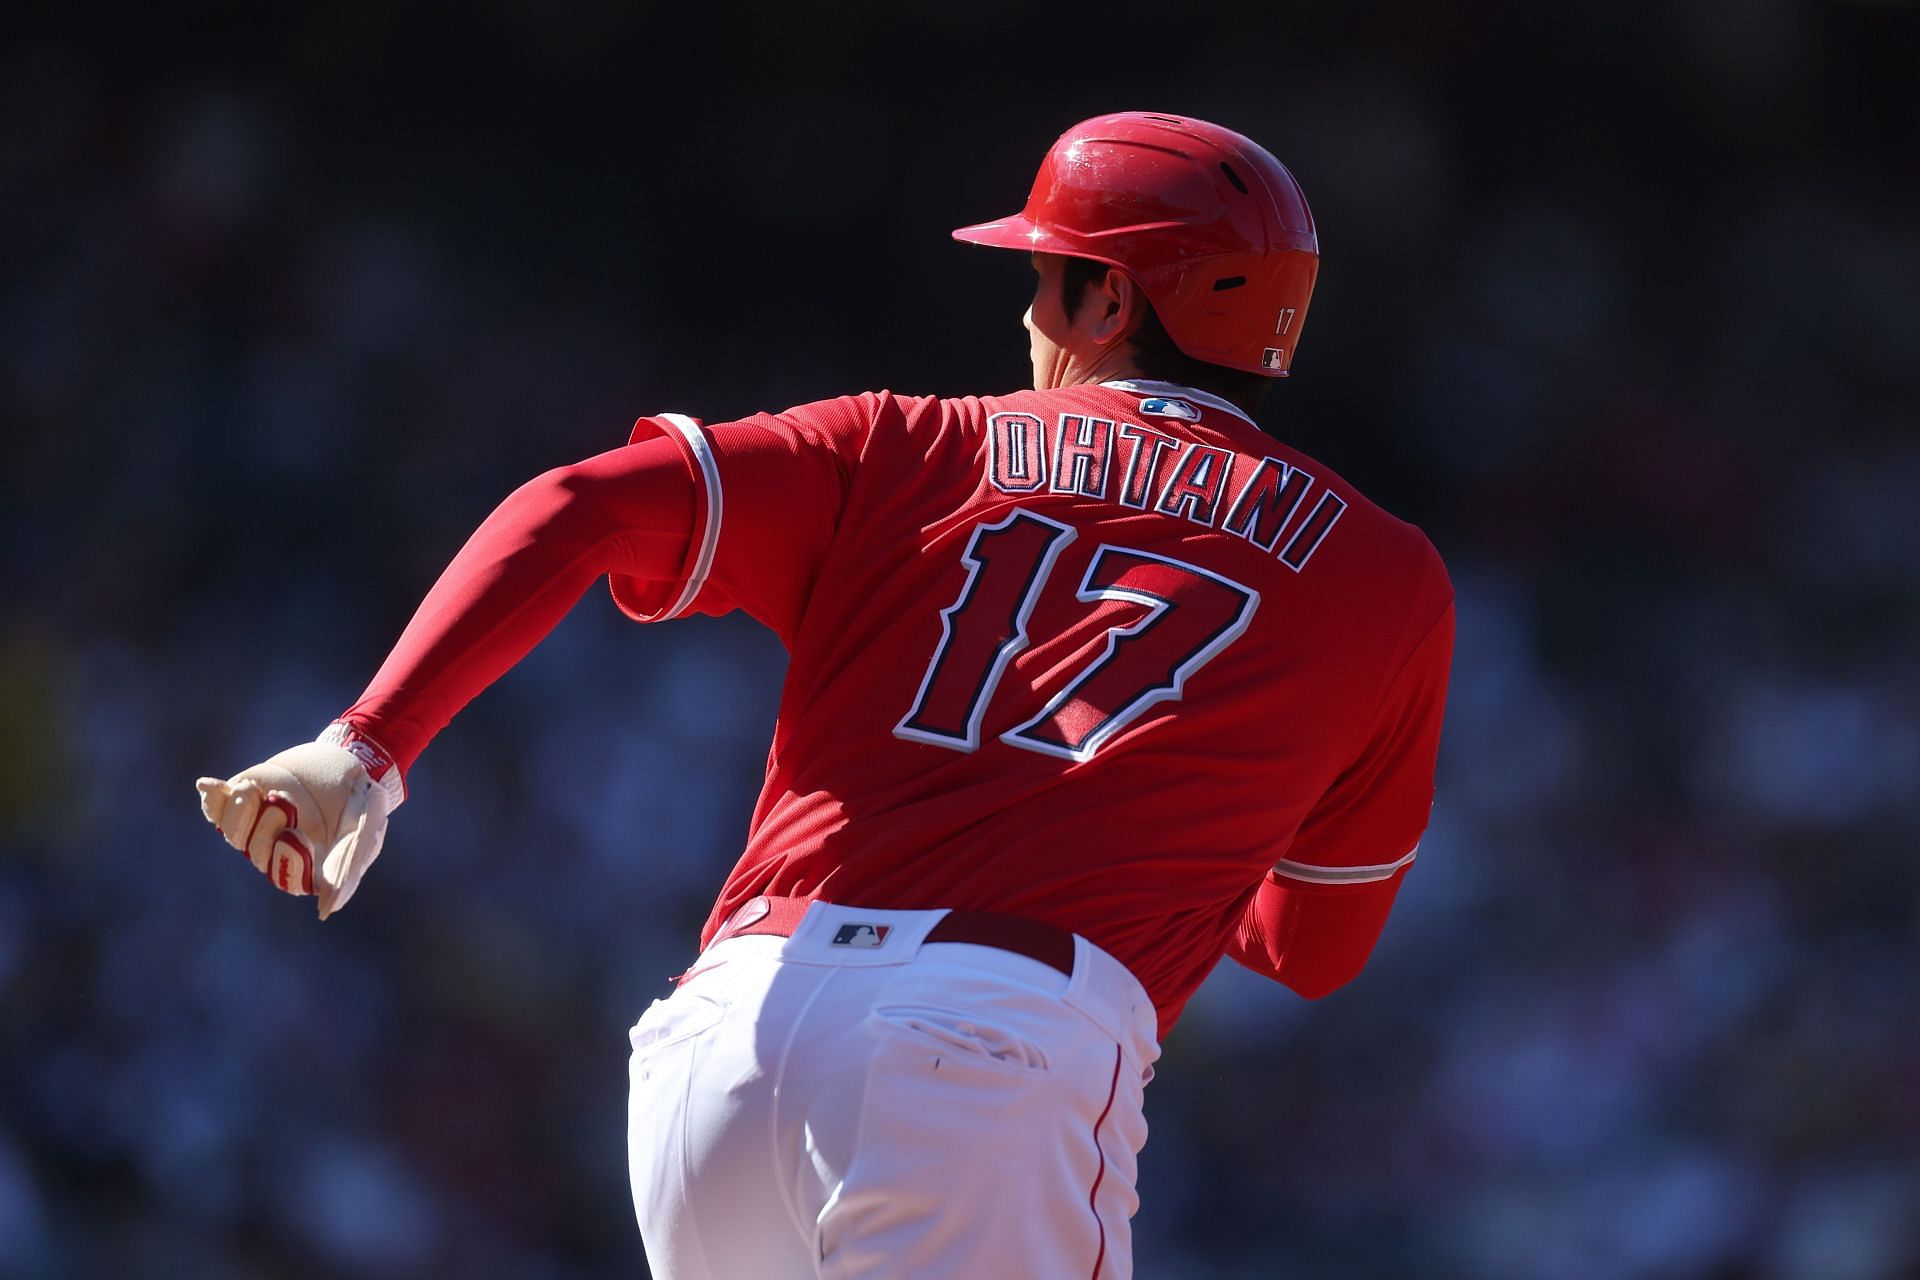 Shohei Ohtani of the Los Angeles Angels leads off against the New York Yankees at Angel Stadium